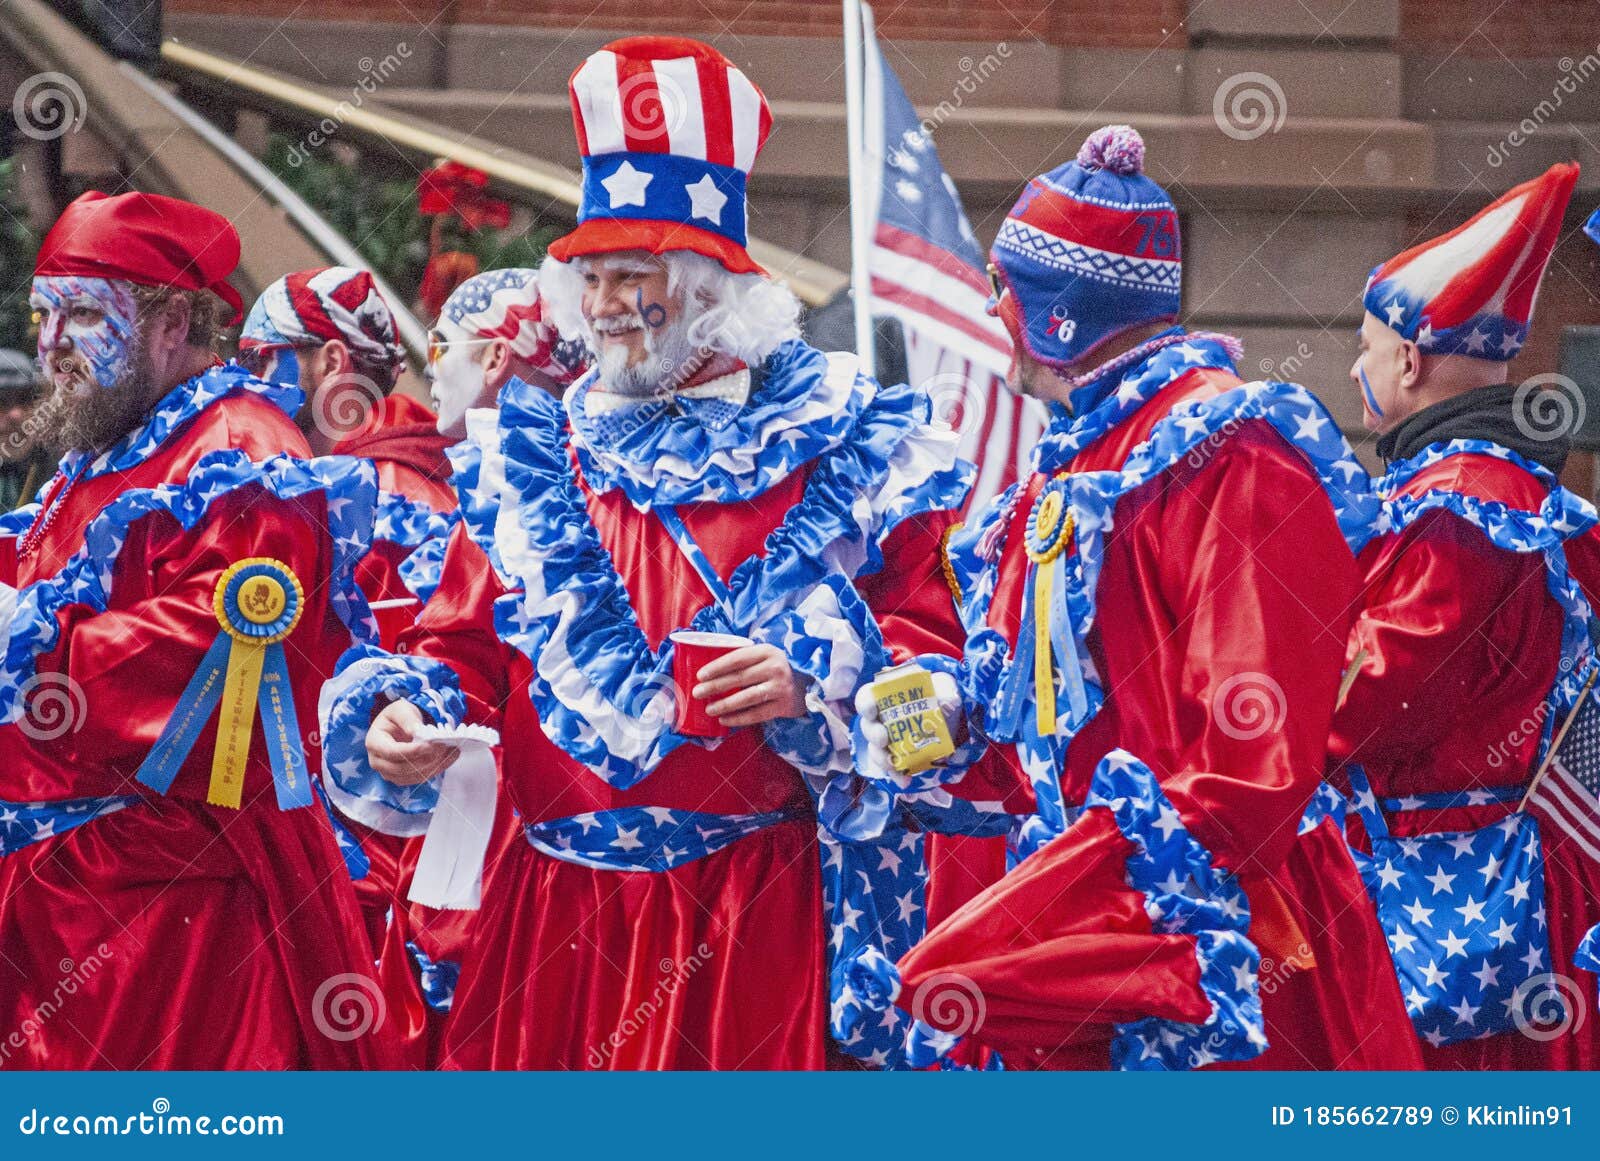 Mummers Day Parade American Patriotic Costume Editorial Stock Image ...